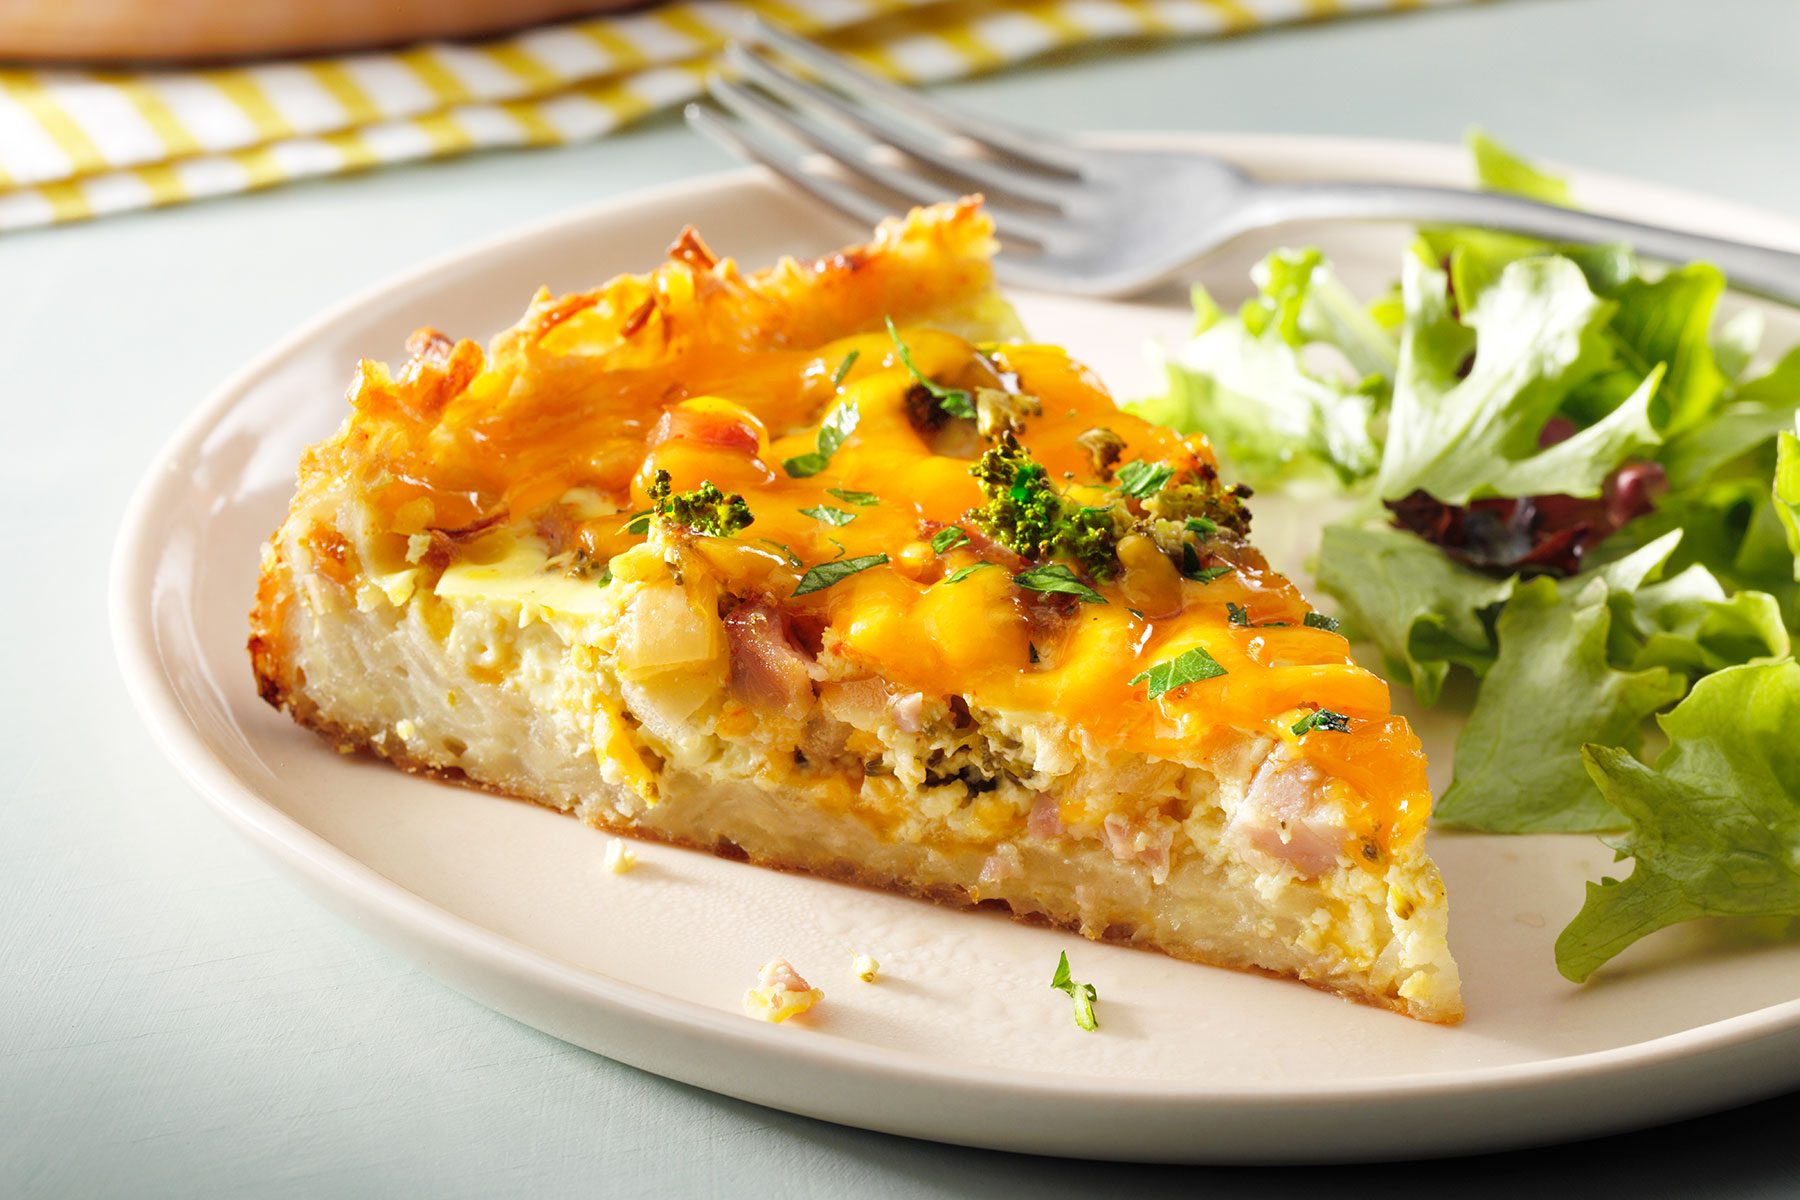 Slice of Potato Crust Quiche served on plate with lettuce